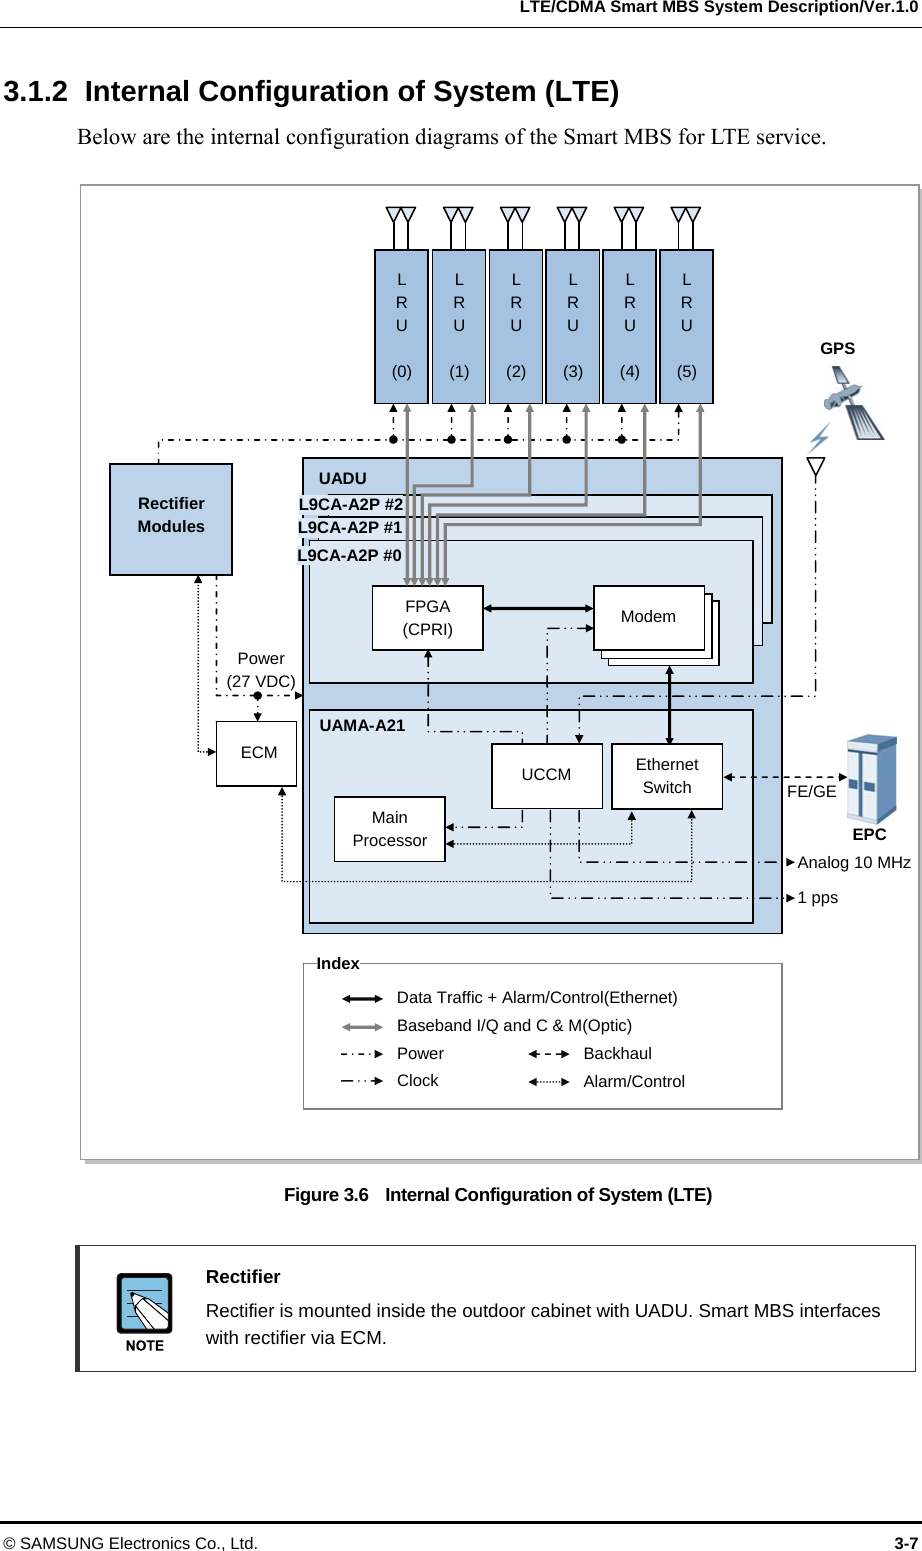   LTE/CDMA Smart MBS System Description/Ver.1.0 © SAMSUNG Electronics Co., Ltd.  3-7 3.1.2  Internal Configuration of System (LTE) Below are the internal configuration diagrams of the Smart MBS for LTE service.  Figure 3.6    Internal Configuration of System (LTE)   Rectifier   Rectifier is mounted inside the outdoor cabinet with UADU. Smart MBS interfaces with rectifier via ECM. UADU FPGA (CPRI) L9CA-A2P #2 L9CA-A2P #1 L9CA-A2P #0 Power (27 VDC) GPS Index Data Traffic + Alarm/Control(Ethernet) Baseband I/Q and C &amp; M(Optic) Power  BackhaulClock  Alarm/Control ModemUAMA-A21 Main ProcessorFE/GE EPC Analog 10 MHz 1 pps UCCM Ethernet Switch ECM L R U  (0)L R U  (1)L R U  (2)L R U  (3)L R U  (4)L R U  (5)Rectifier Modules 